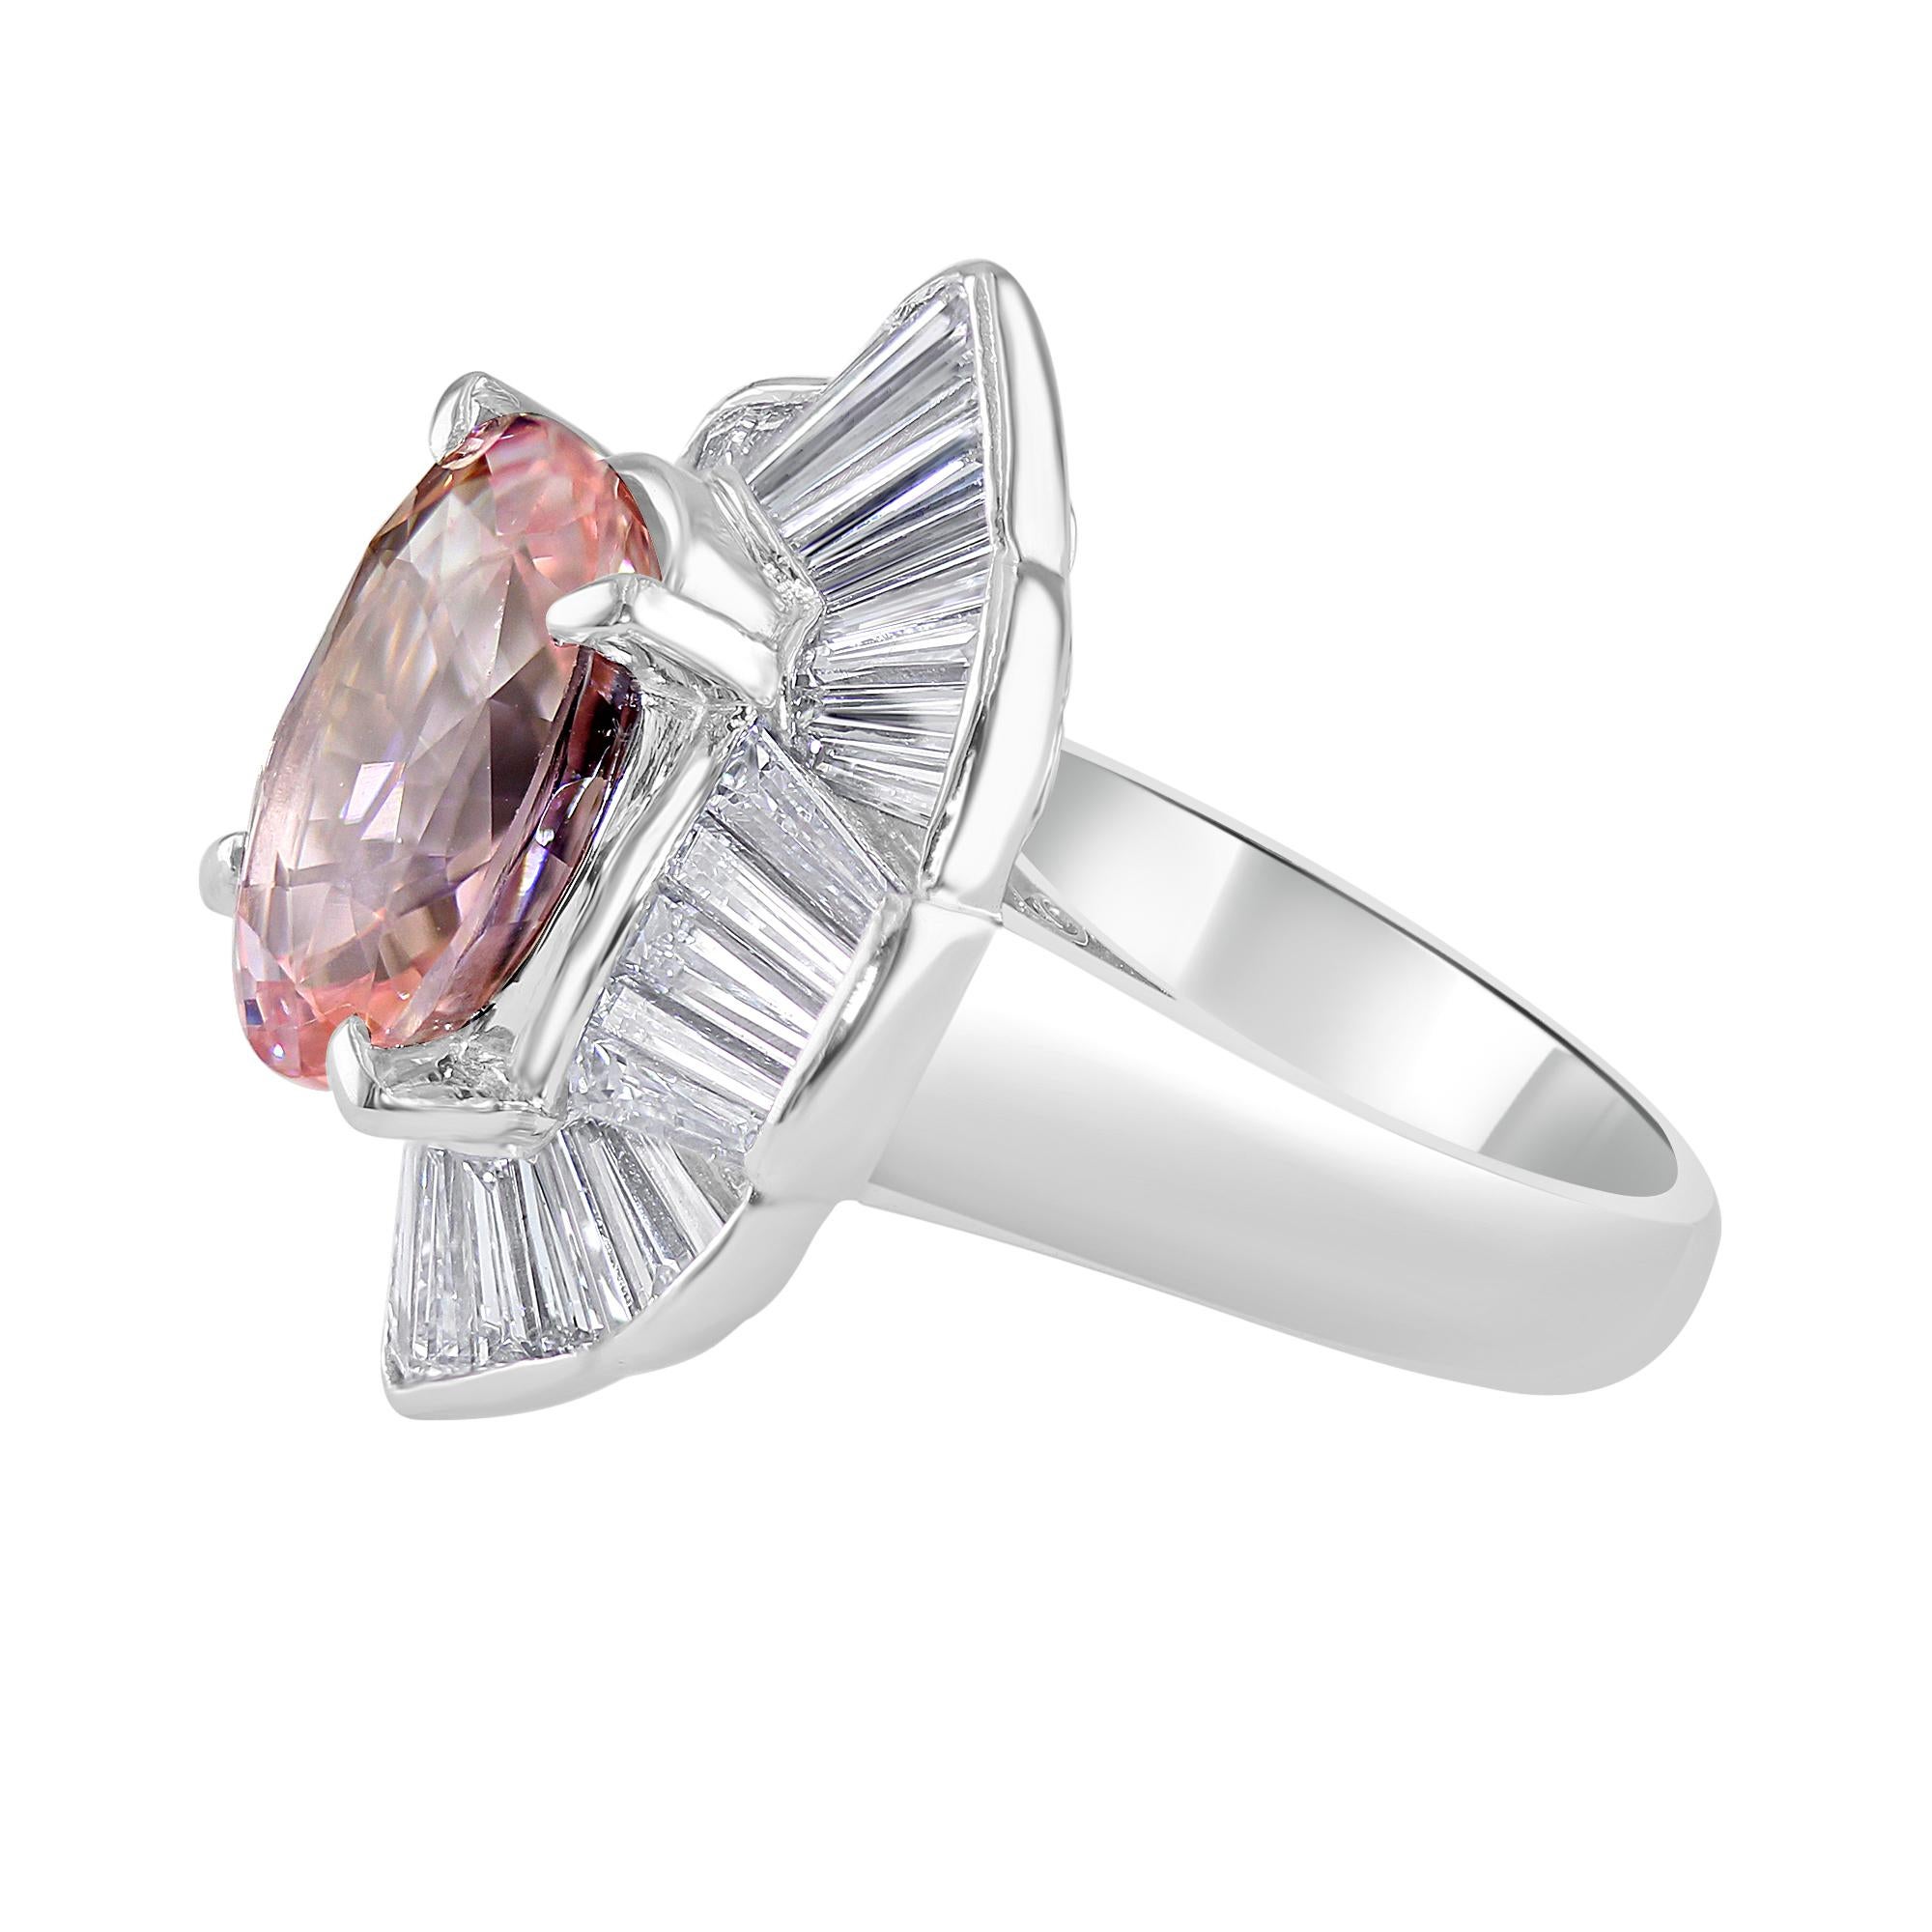 7.24ct GRS certified Oval Padparadscha Ballerina Ring, complimented by 2.59 ct total weight, Baguette Diamonds.
Beautiful, elegant and delicate ring, that shines in every angle. Perfect one-of-a-kind accessory for any occasion. 
Set in Platinum. 